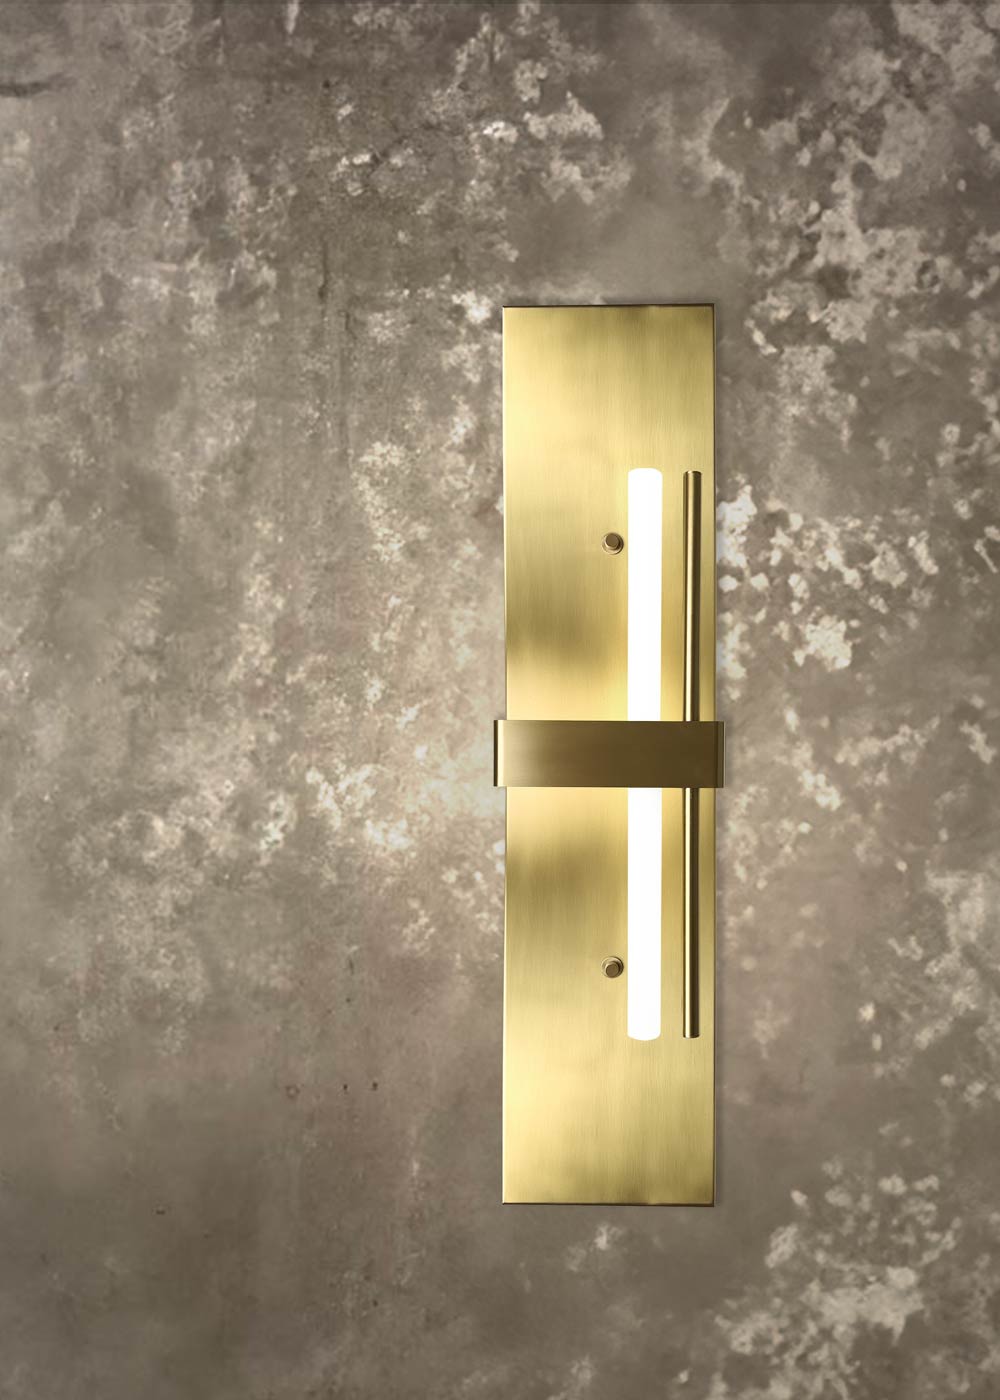 Italian Design Lighting in brass by Ghidini 1849 - brass wall lamp made in Italy with concrete wall background